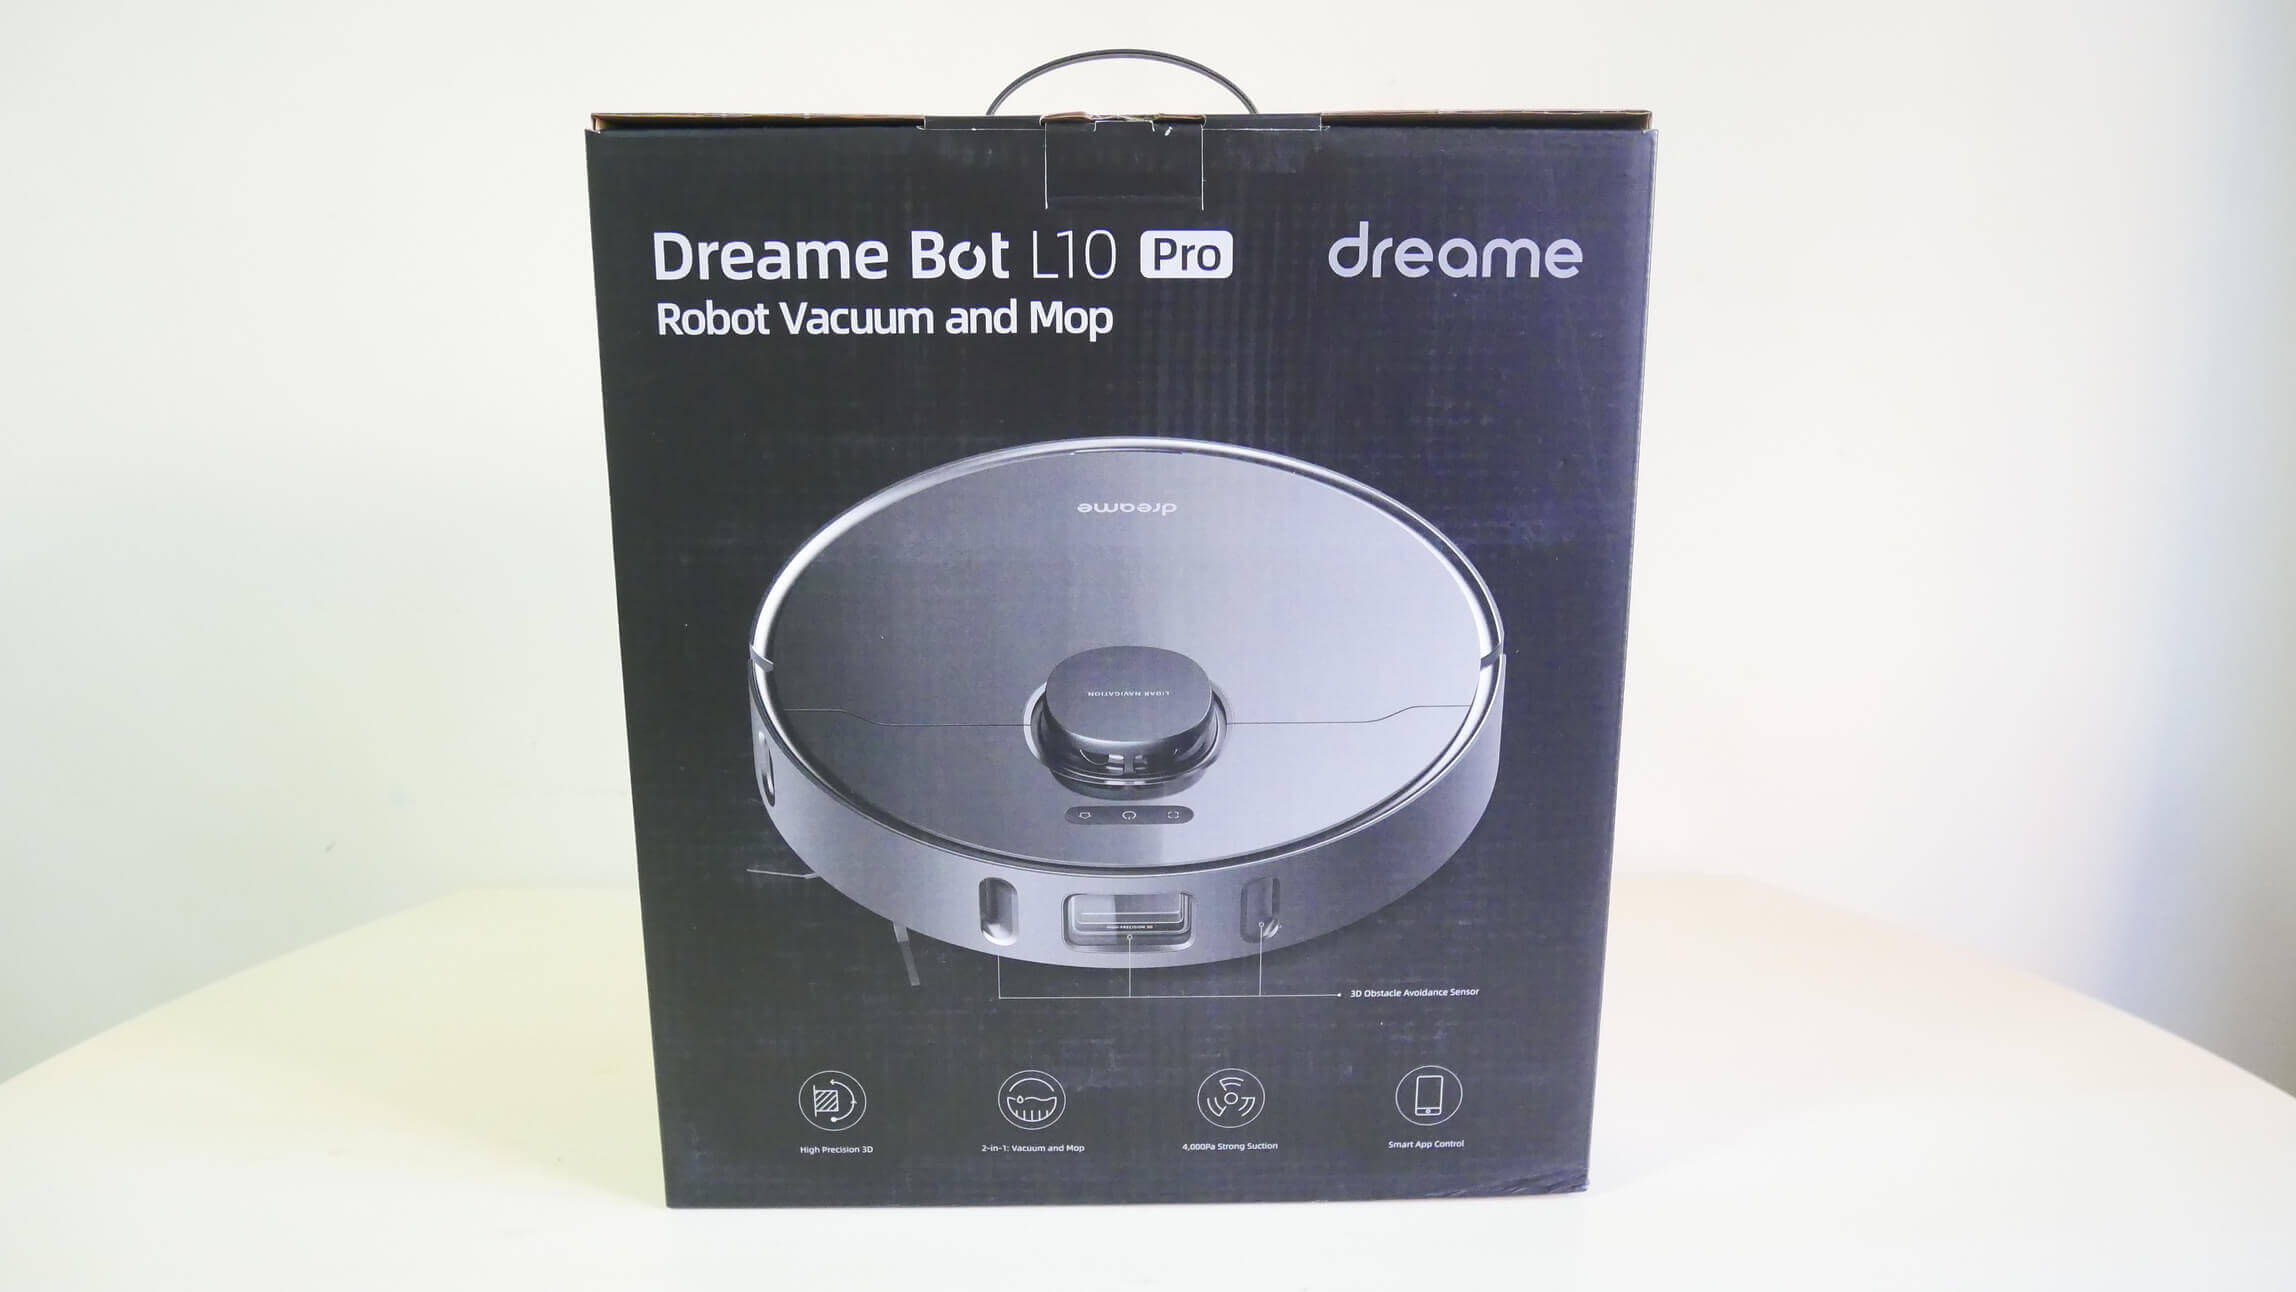 Dreame Bot L10 Pro Review: A Mopping and Vacuuming Robot with LiDAR